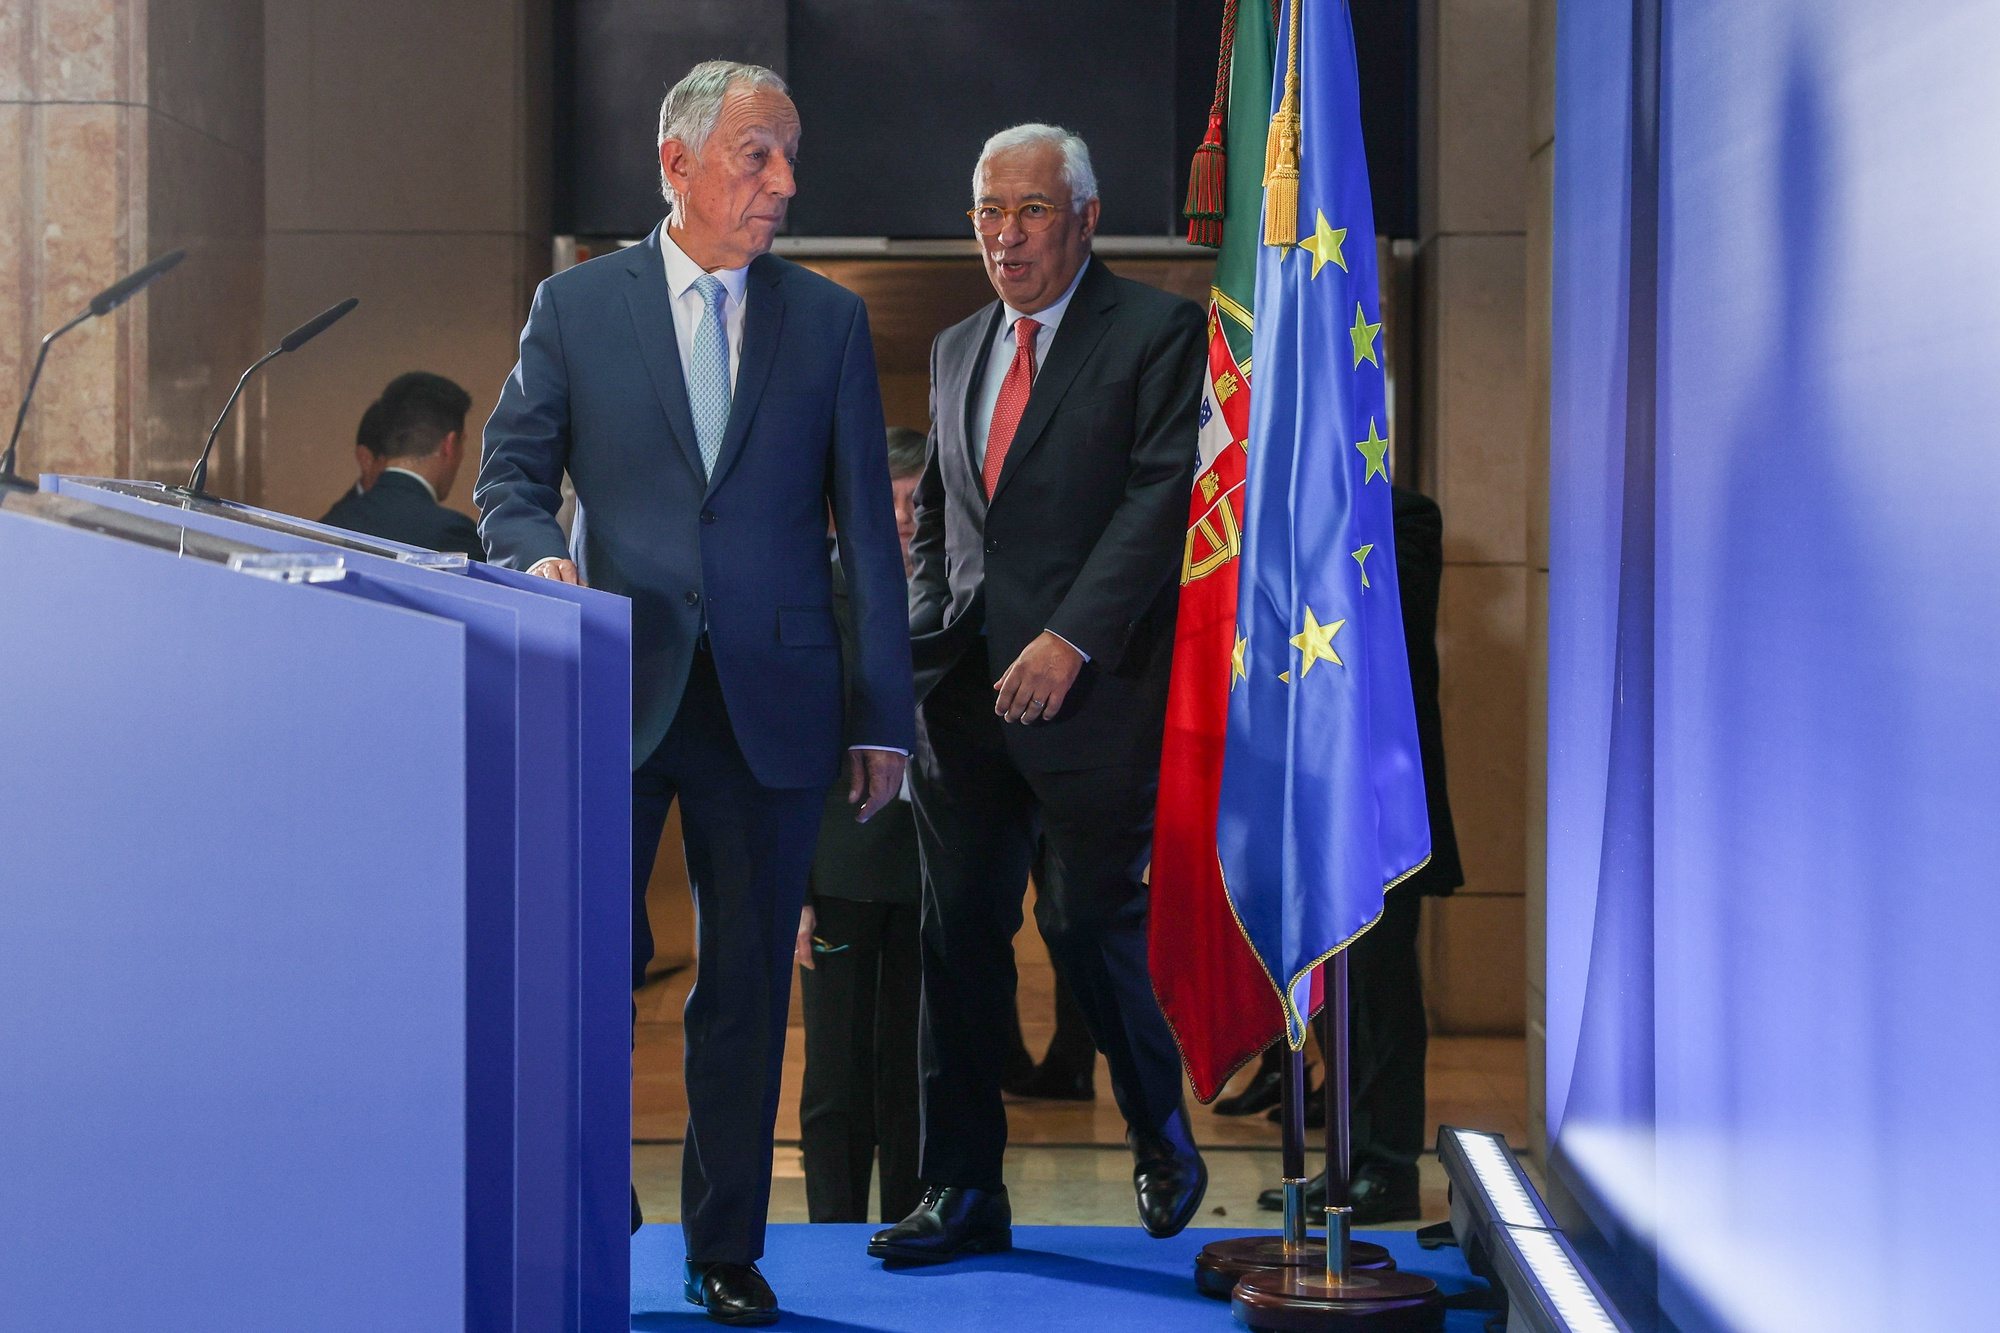 Portugal&#039;s President Marcelo Rebelo de Sousa (L) and Prime Minister Antonio Costa (R) arrive to attend a press conference at the end of the last meeting of the Council of Ministers of the XXIII Constitutional Government, which for the first time is being held in the new Government building, the former headquarters of Caixa Geral de Depositos (CGD), in Lisbon, Portugal, 25 March 2024. The Council of Ministers of the government led by Antonio Costa is meeting for the last time today and will be chaired by the head of state, with the PRR&#039;s state of play being one of the topics on the agenda. TIAGO PETINGA/LUSA